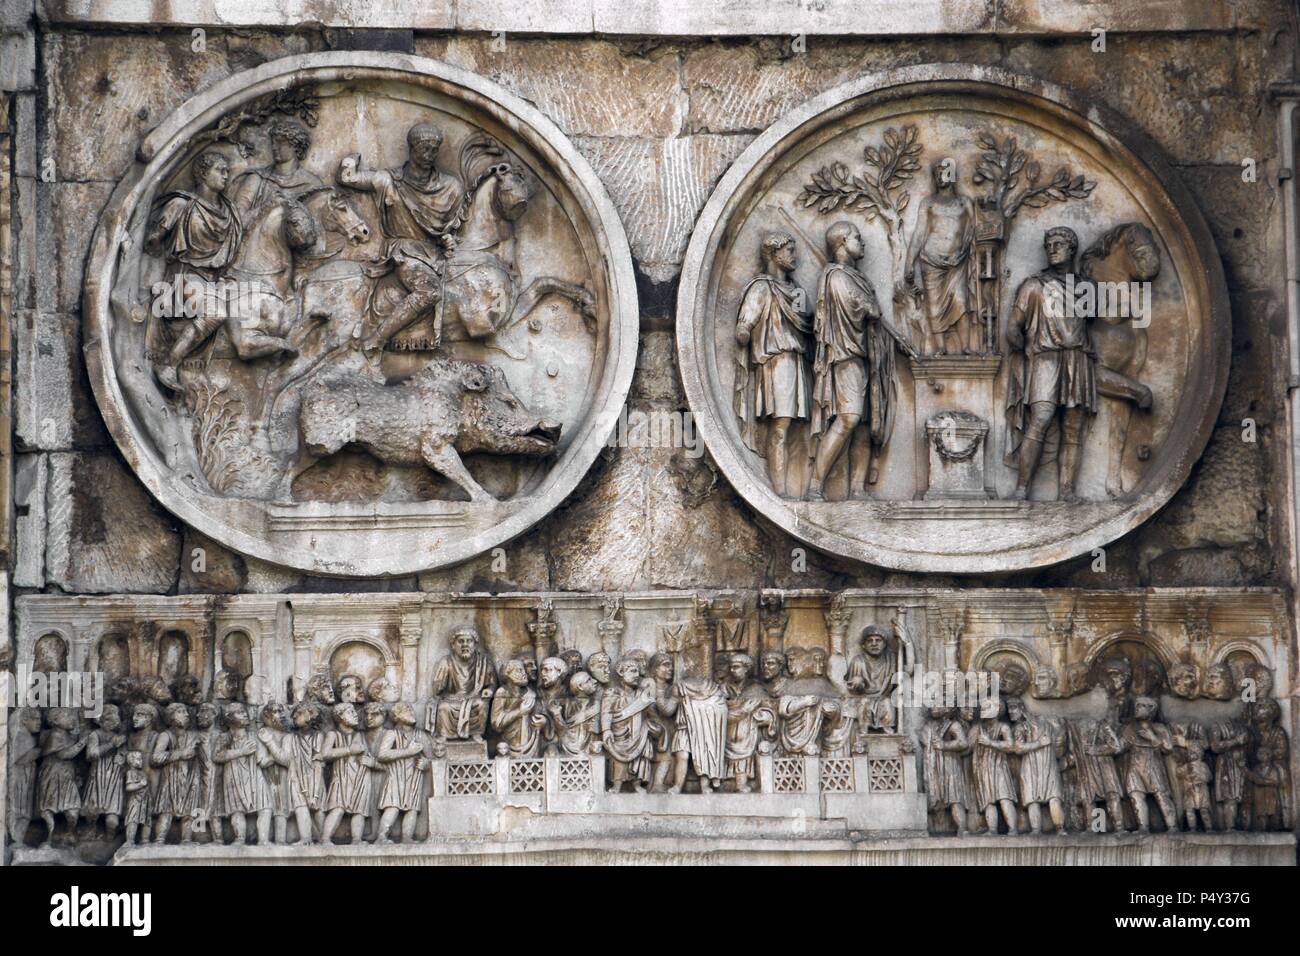 Roman Art. Arch of Constantine. Triumphal arch erected in the 4th century (315) by the Senate in honor of the Emperor Constantine after his victory over Maxentius at the Battle of Milvian Bridge (312). Relief. Rome. Italy. Stock Photo